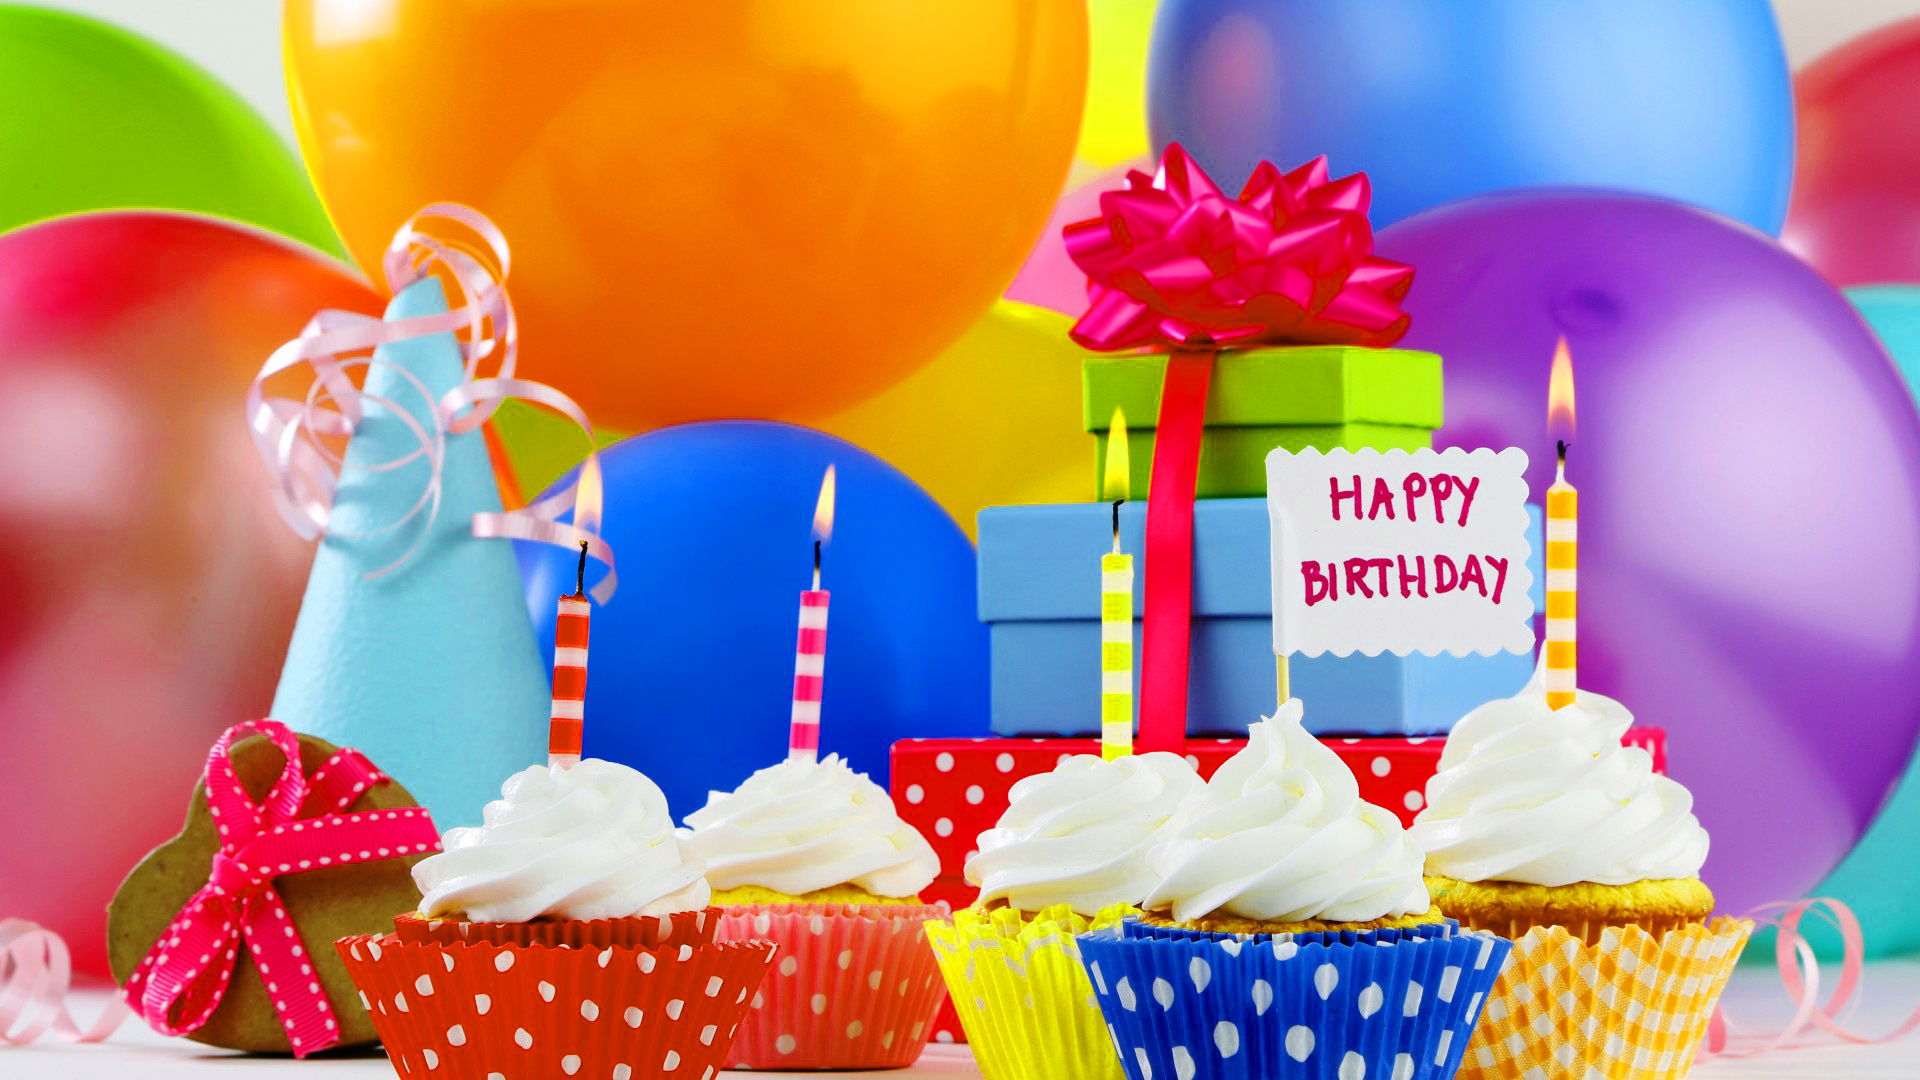 Happy Birthday Images Photo Free Download - Birthday Messages For Female Colleague , HD Wallpaper & Backgrounds